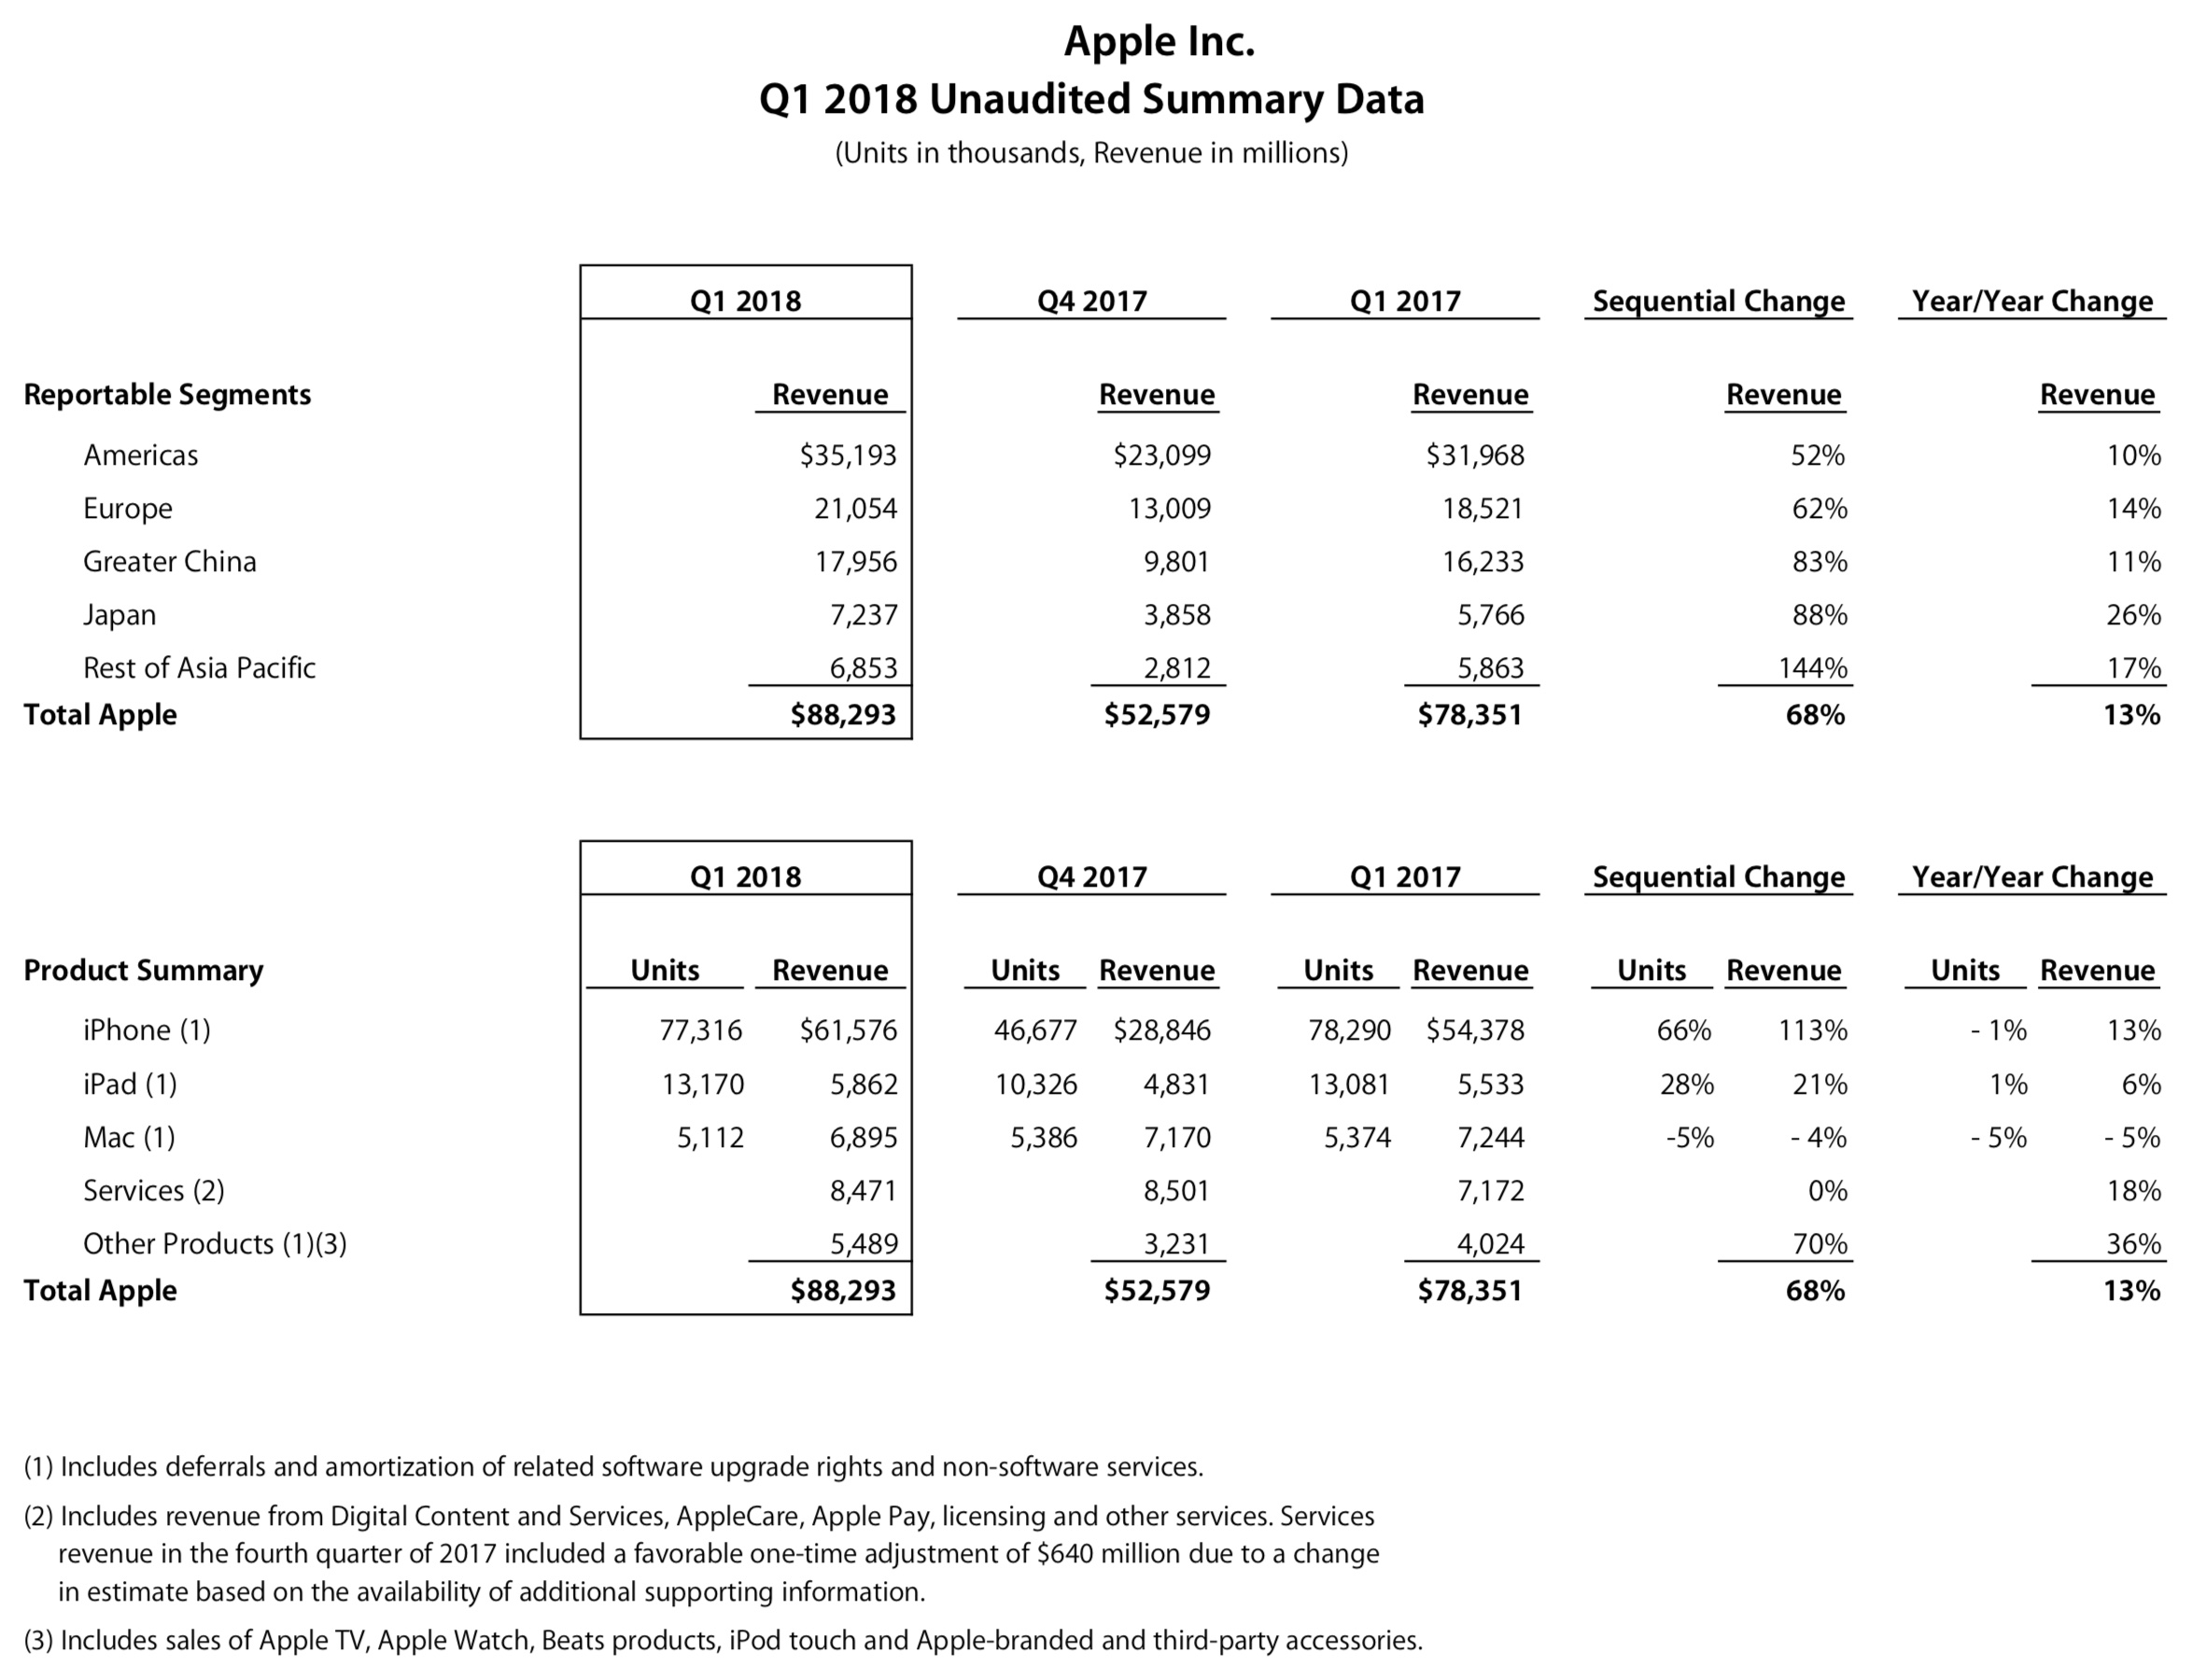 Apple's first fiscal quarter 2018 numbers